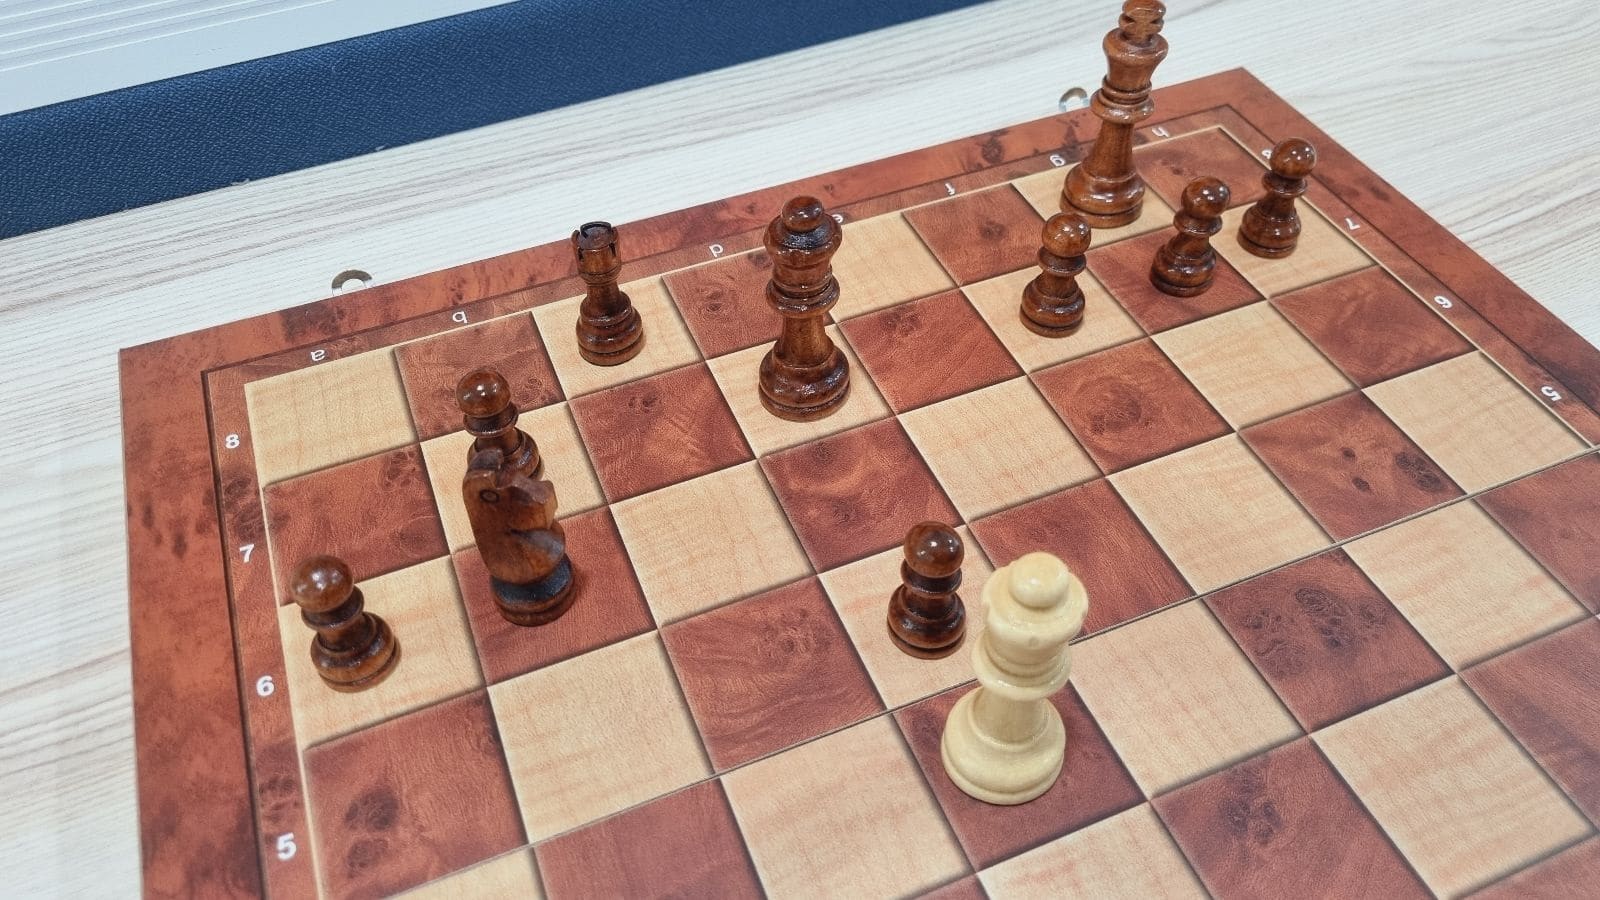 Royal Fork In Chess